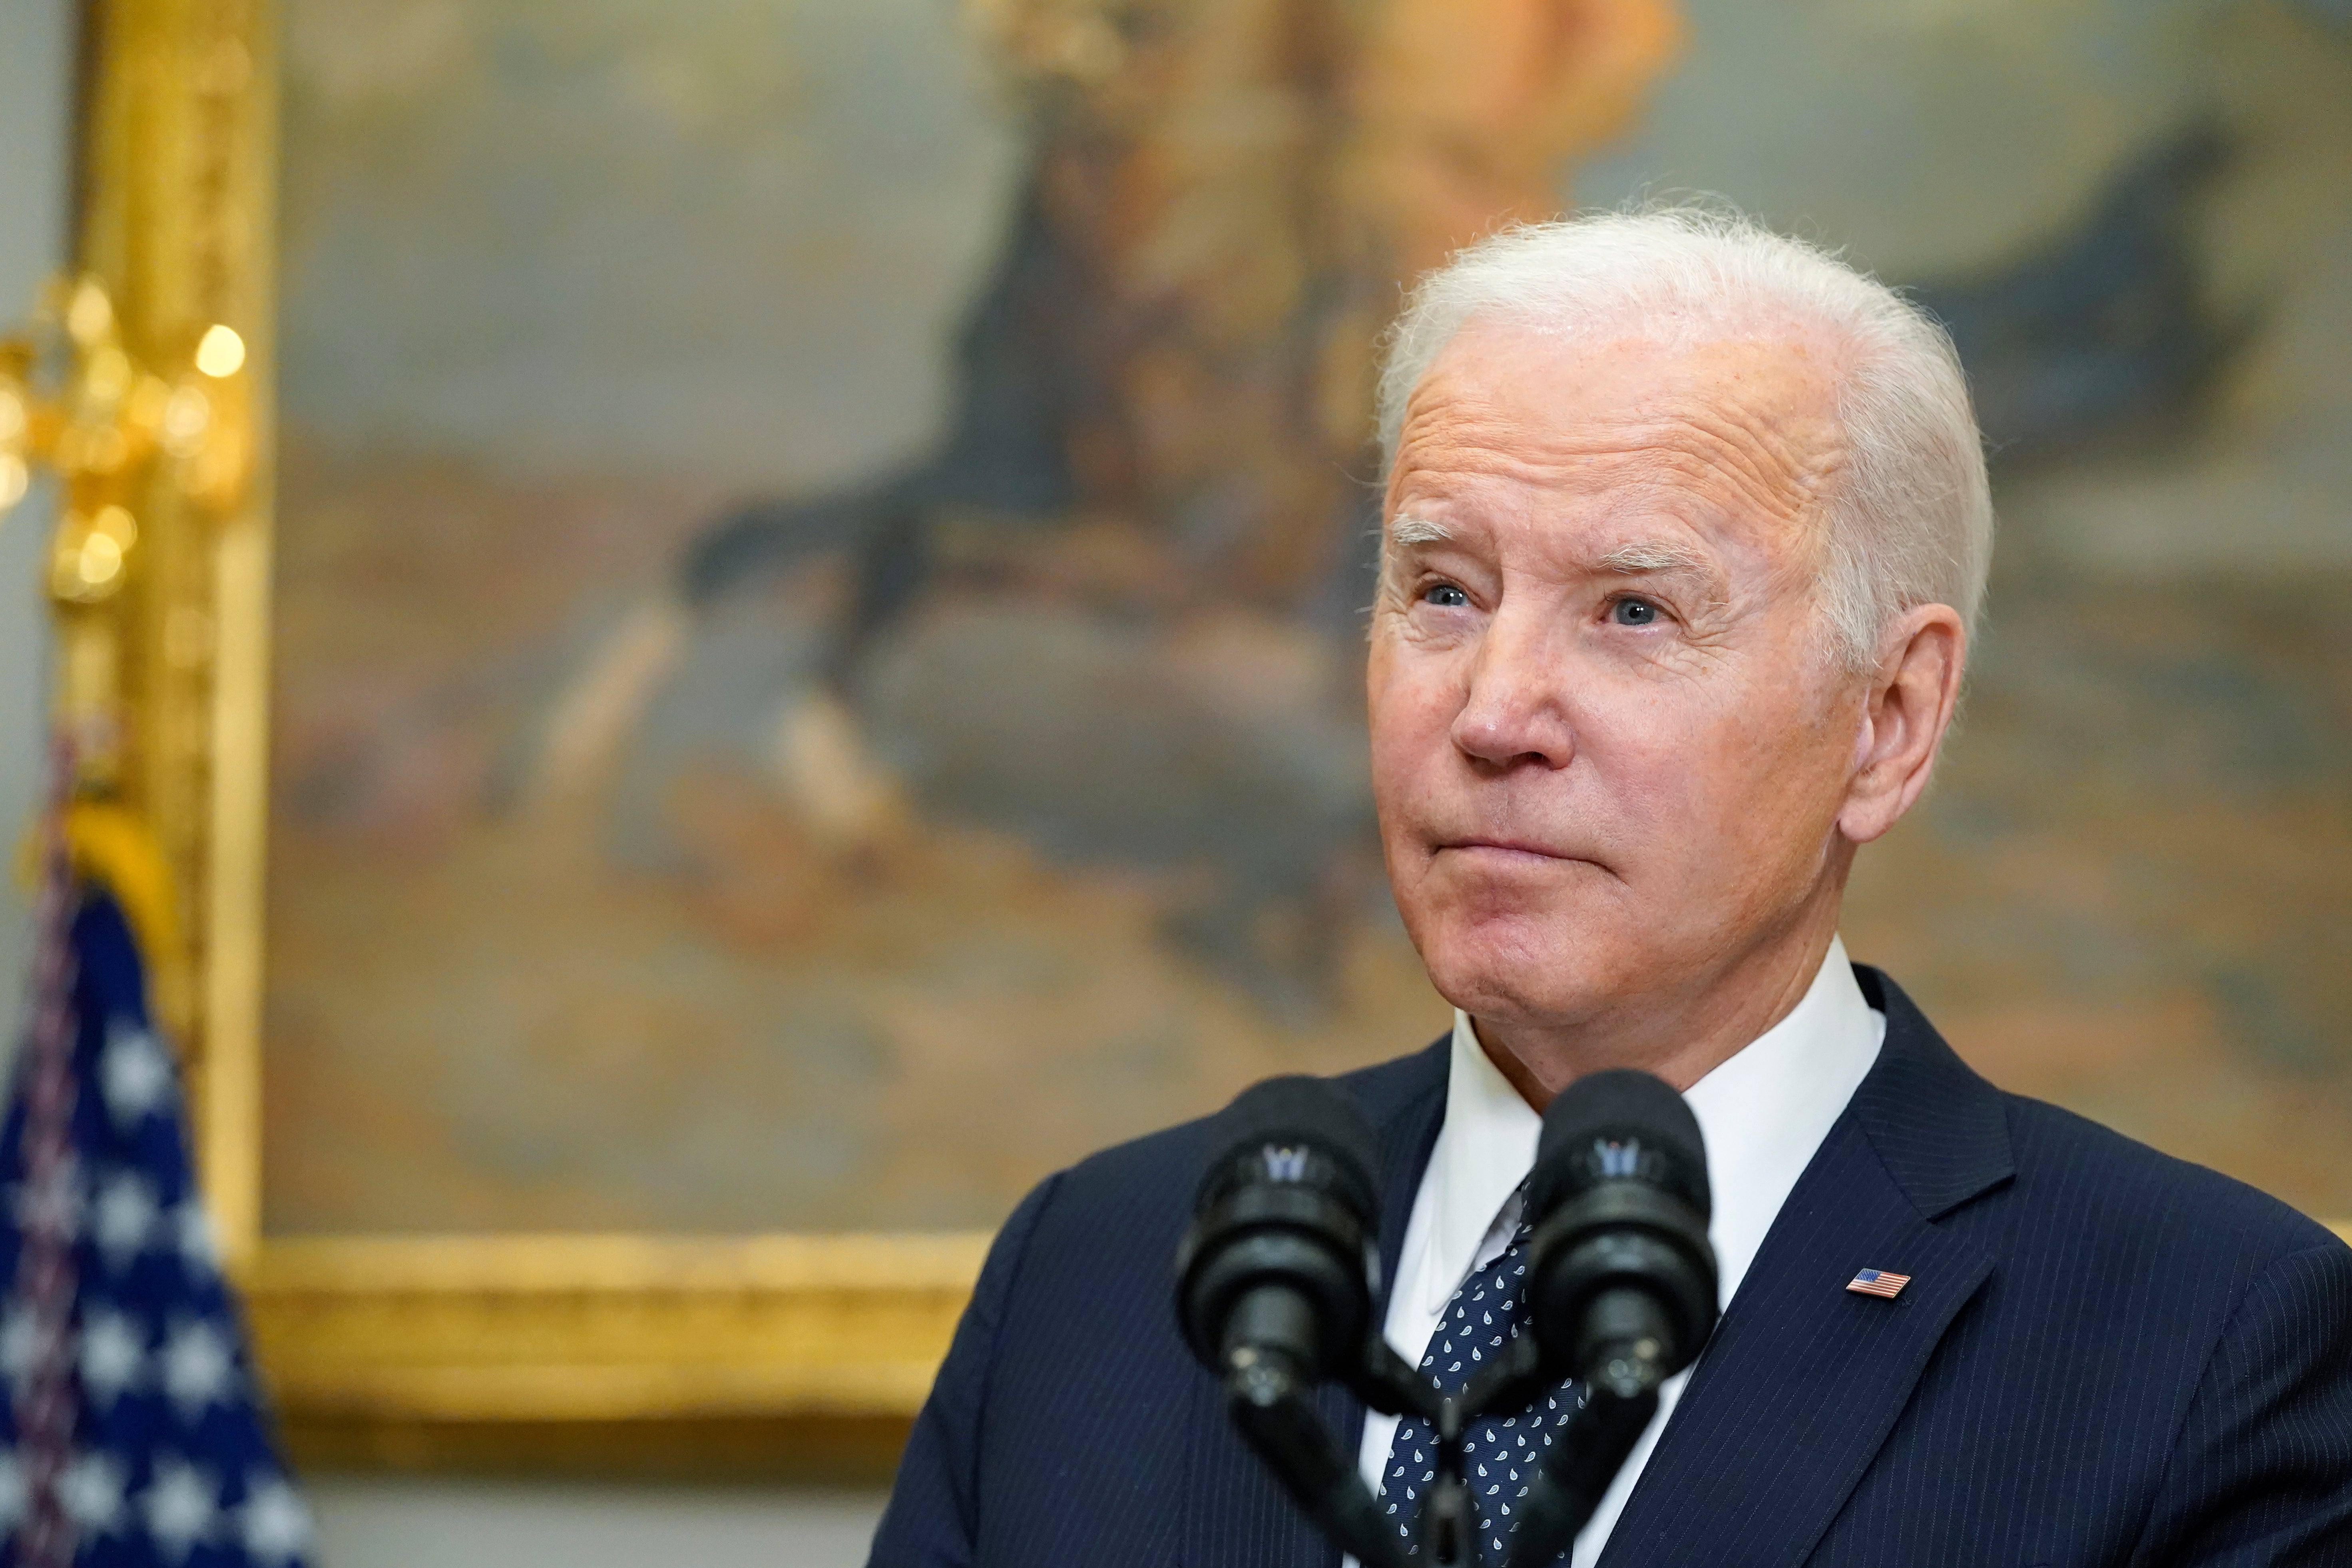 Joe Biden has cause for concern over recent polling of voter intentions